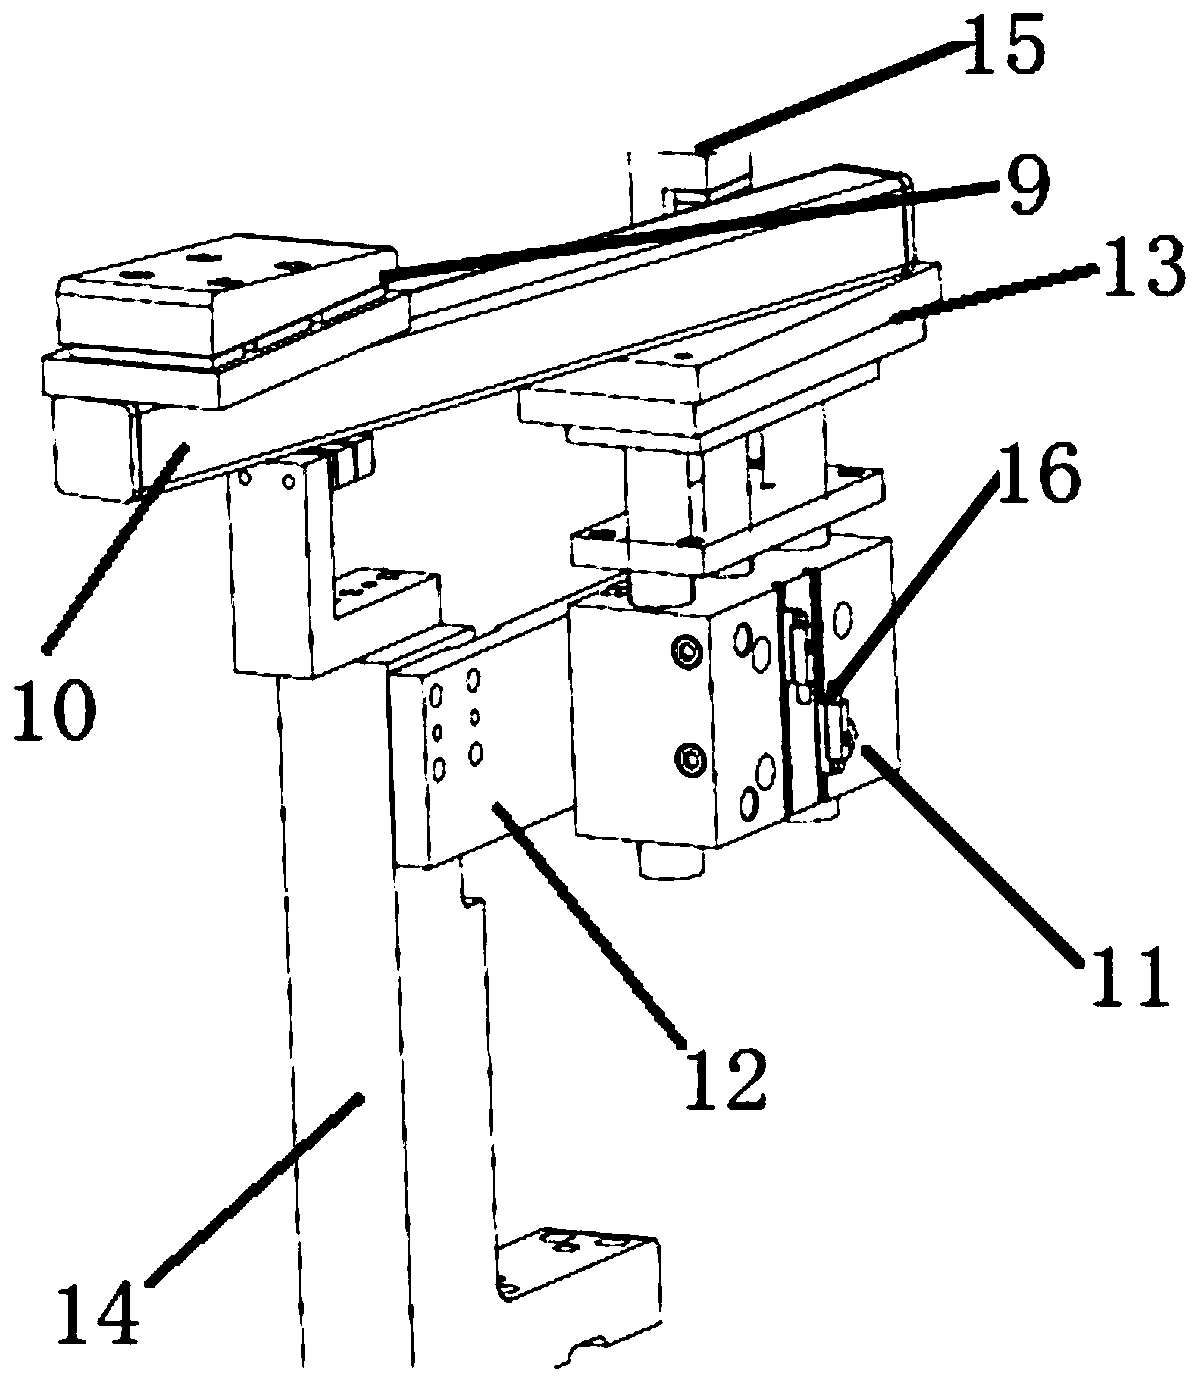 Method for improving positioning strength of built-in clamp